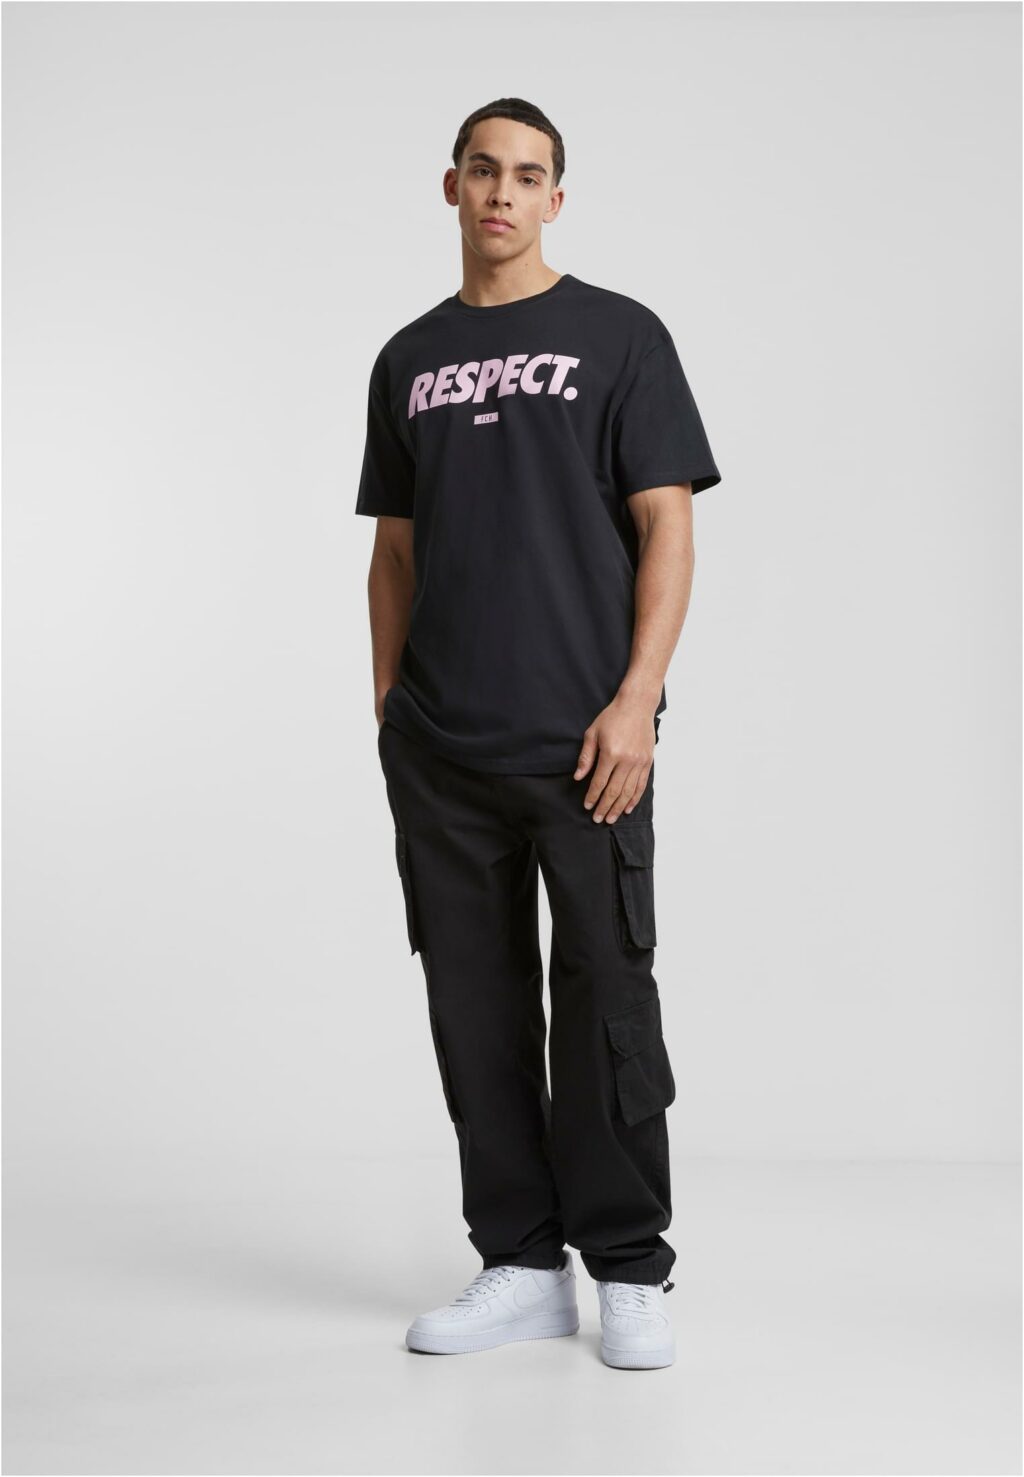 Football's coming Home Respect Oversize Tee black MT3124